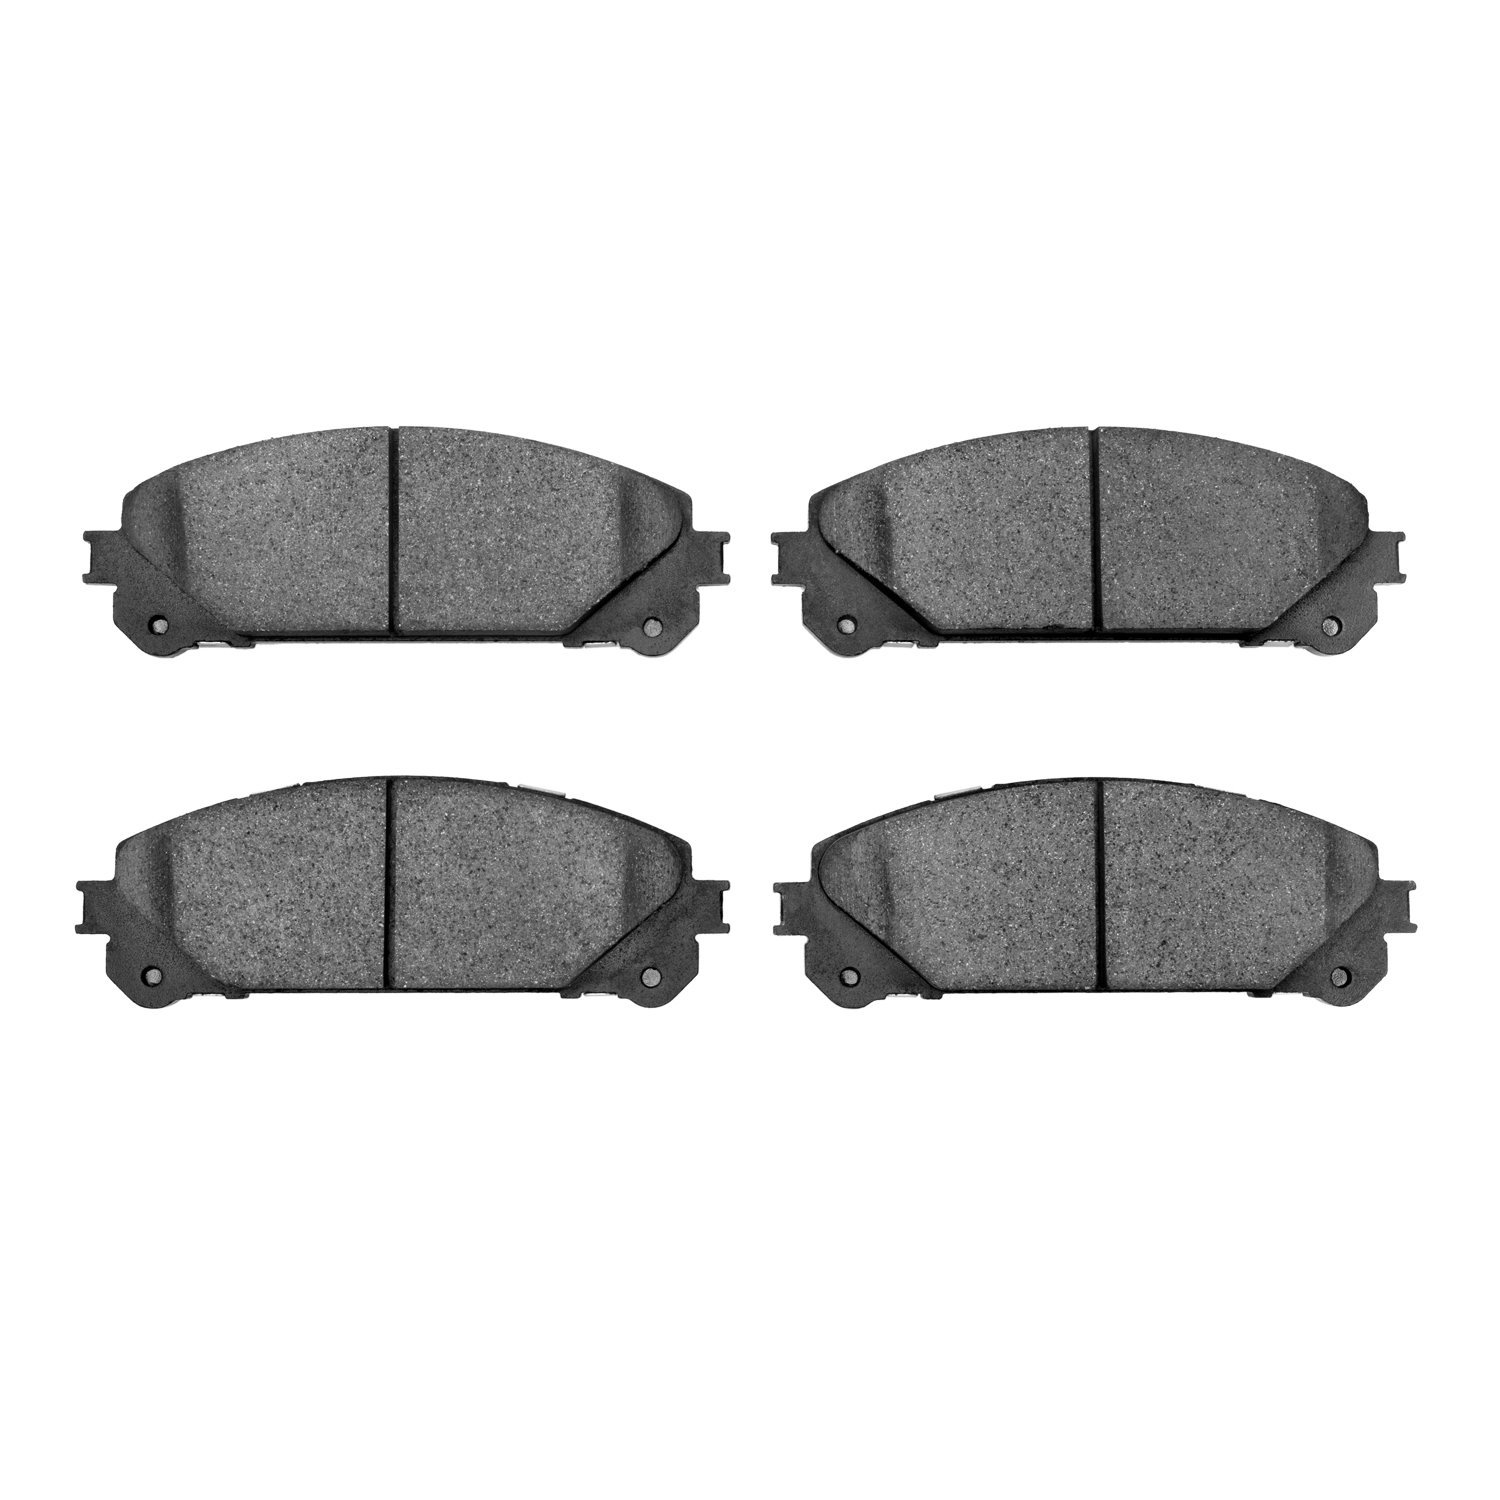 1311-1324-00 3000-Series Semi-Metallic Brake Pads, Fits Select Multiple Makes/Models, Position: Front